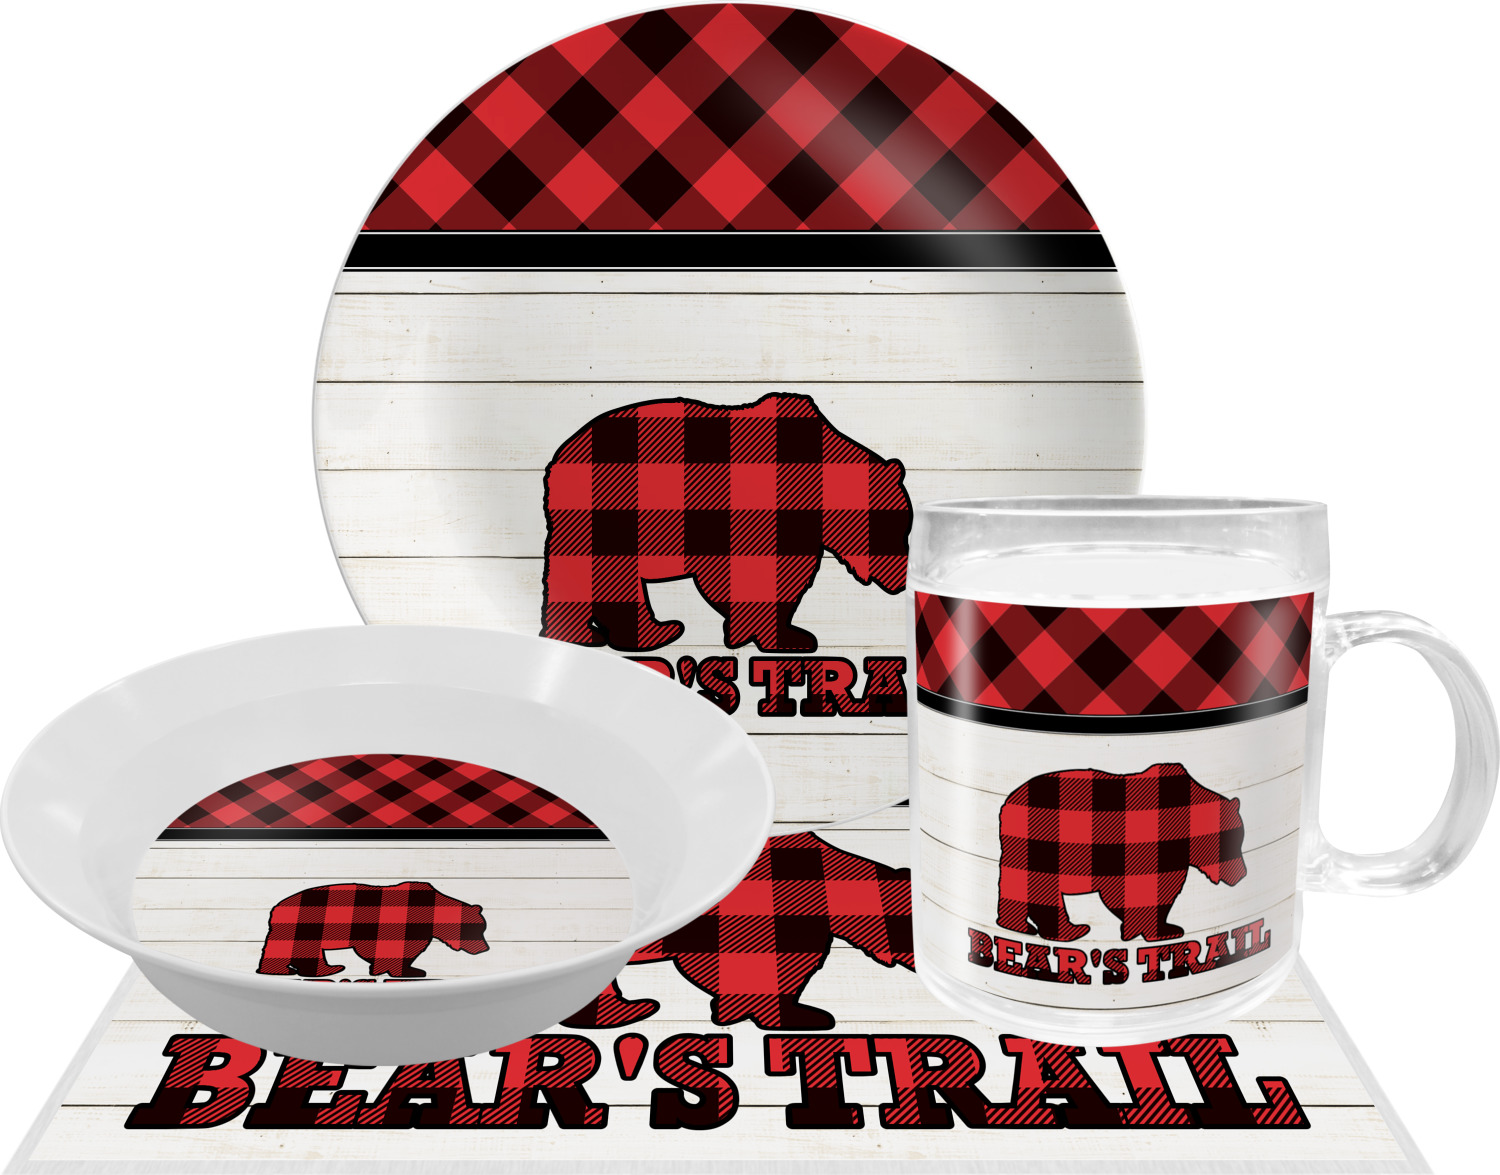 Personalized Childs Plate Lumberjack Bear on Red Plaid Plate or Bowl Personalized for Child 